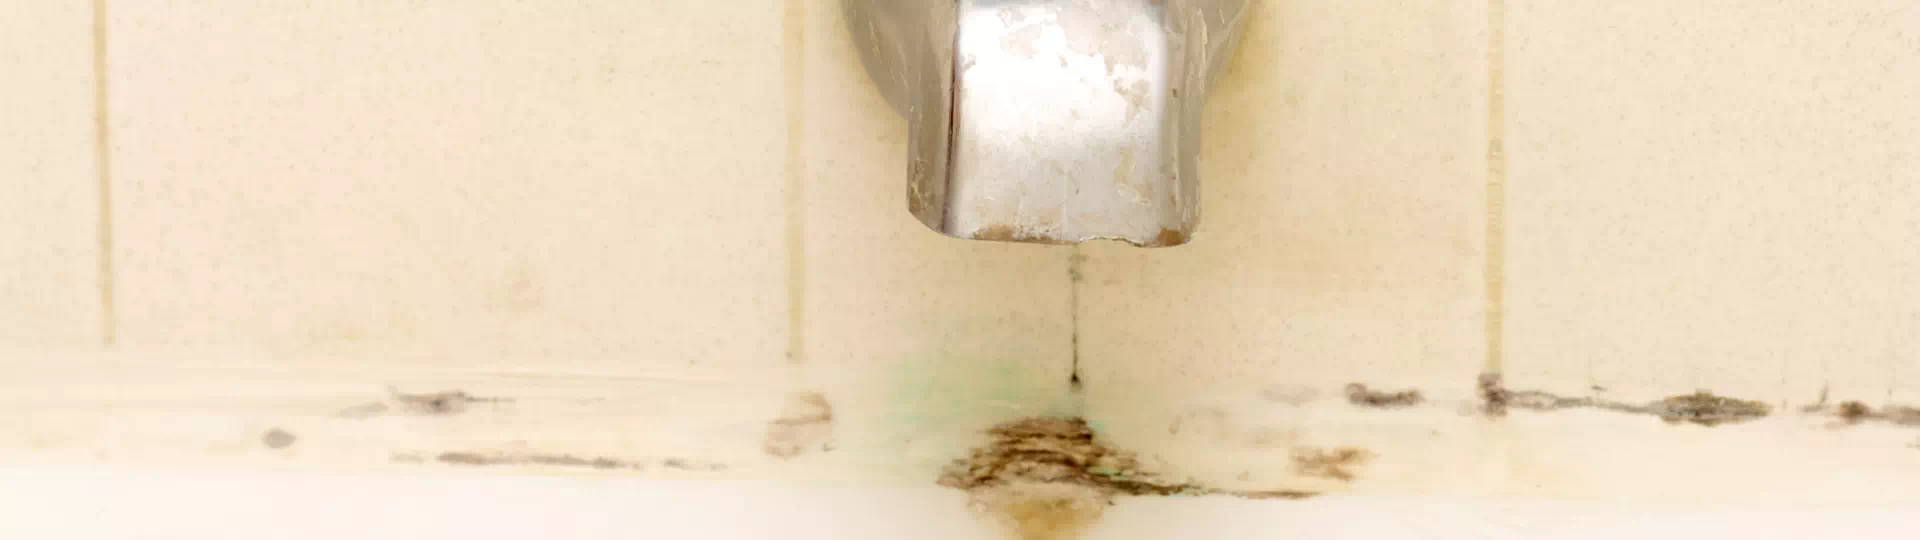 How to Clean Mold in Shower - Simple Green